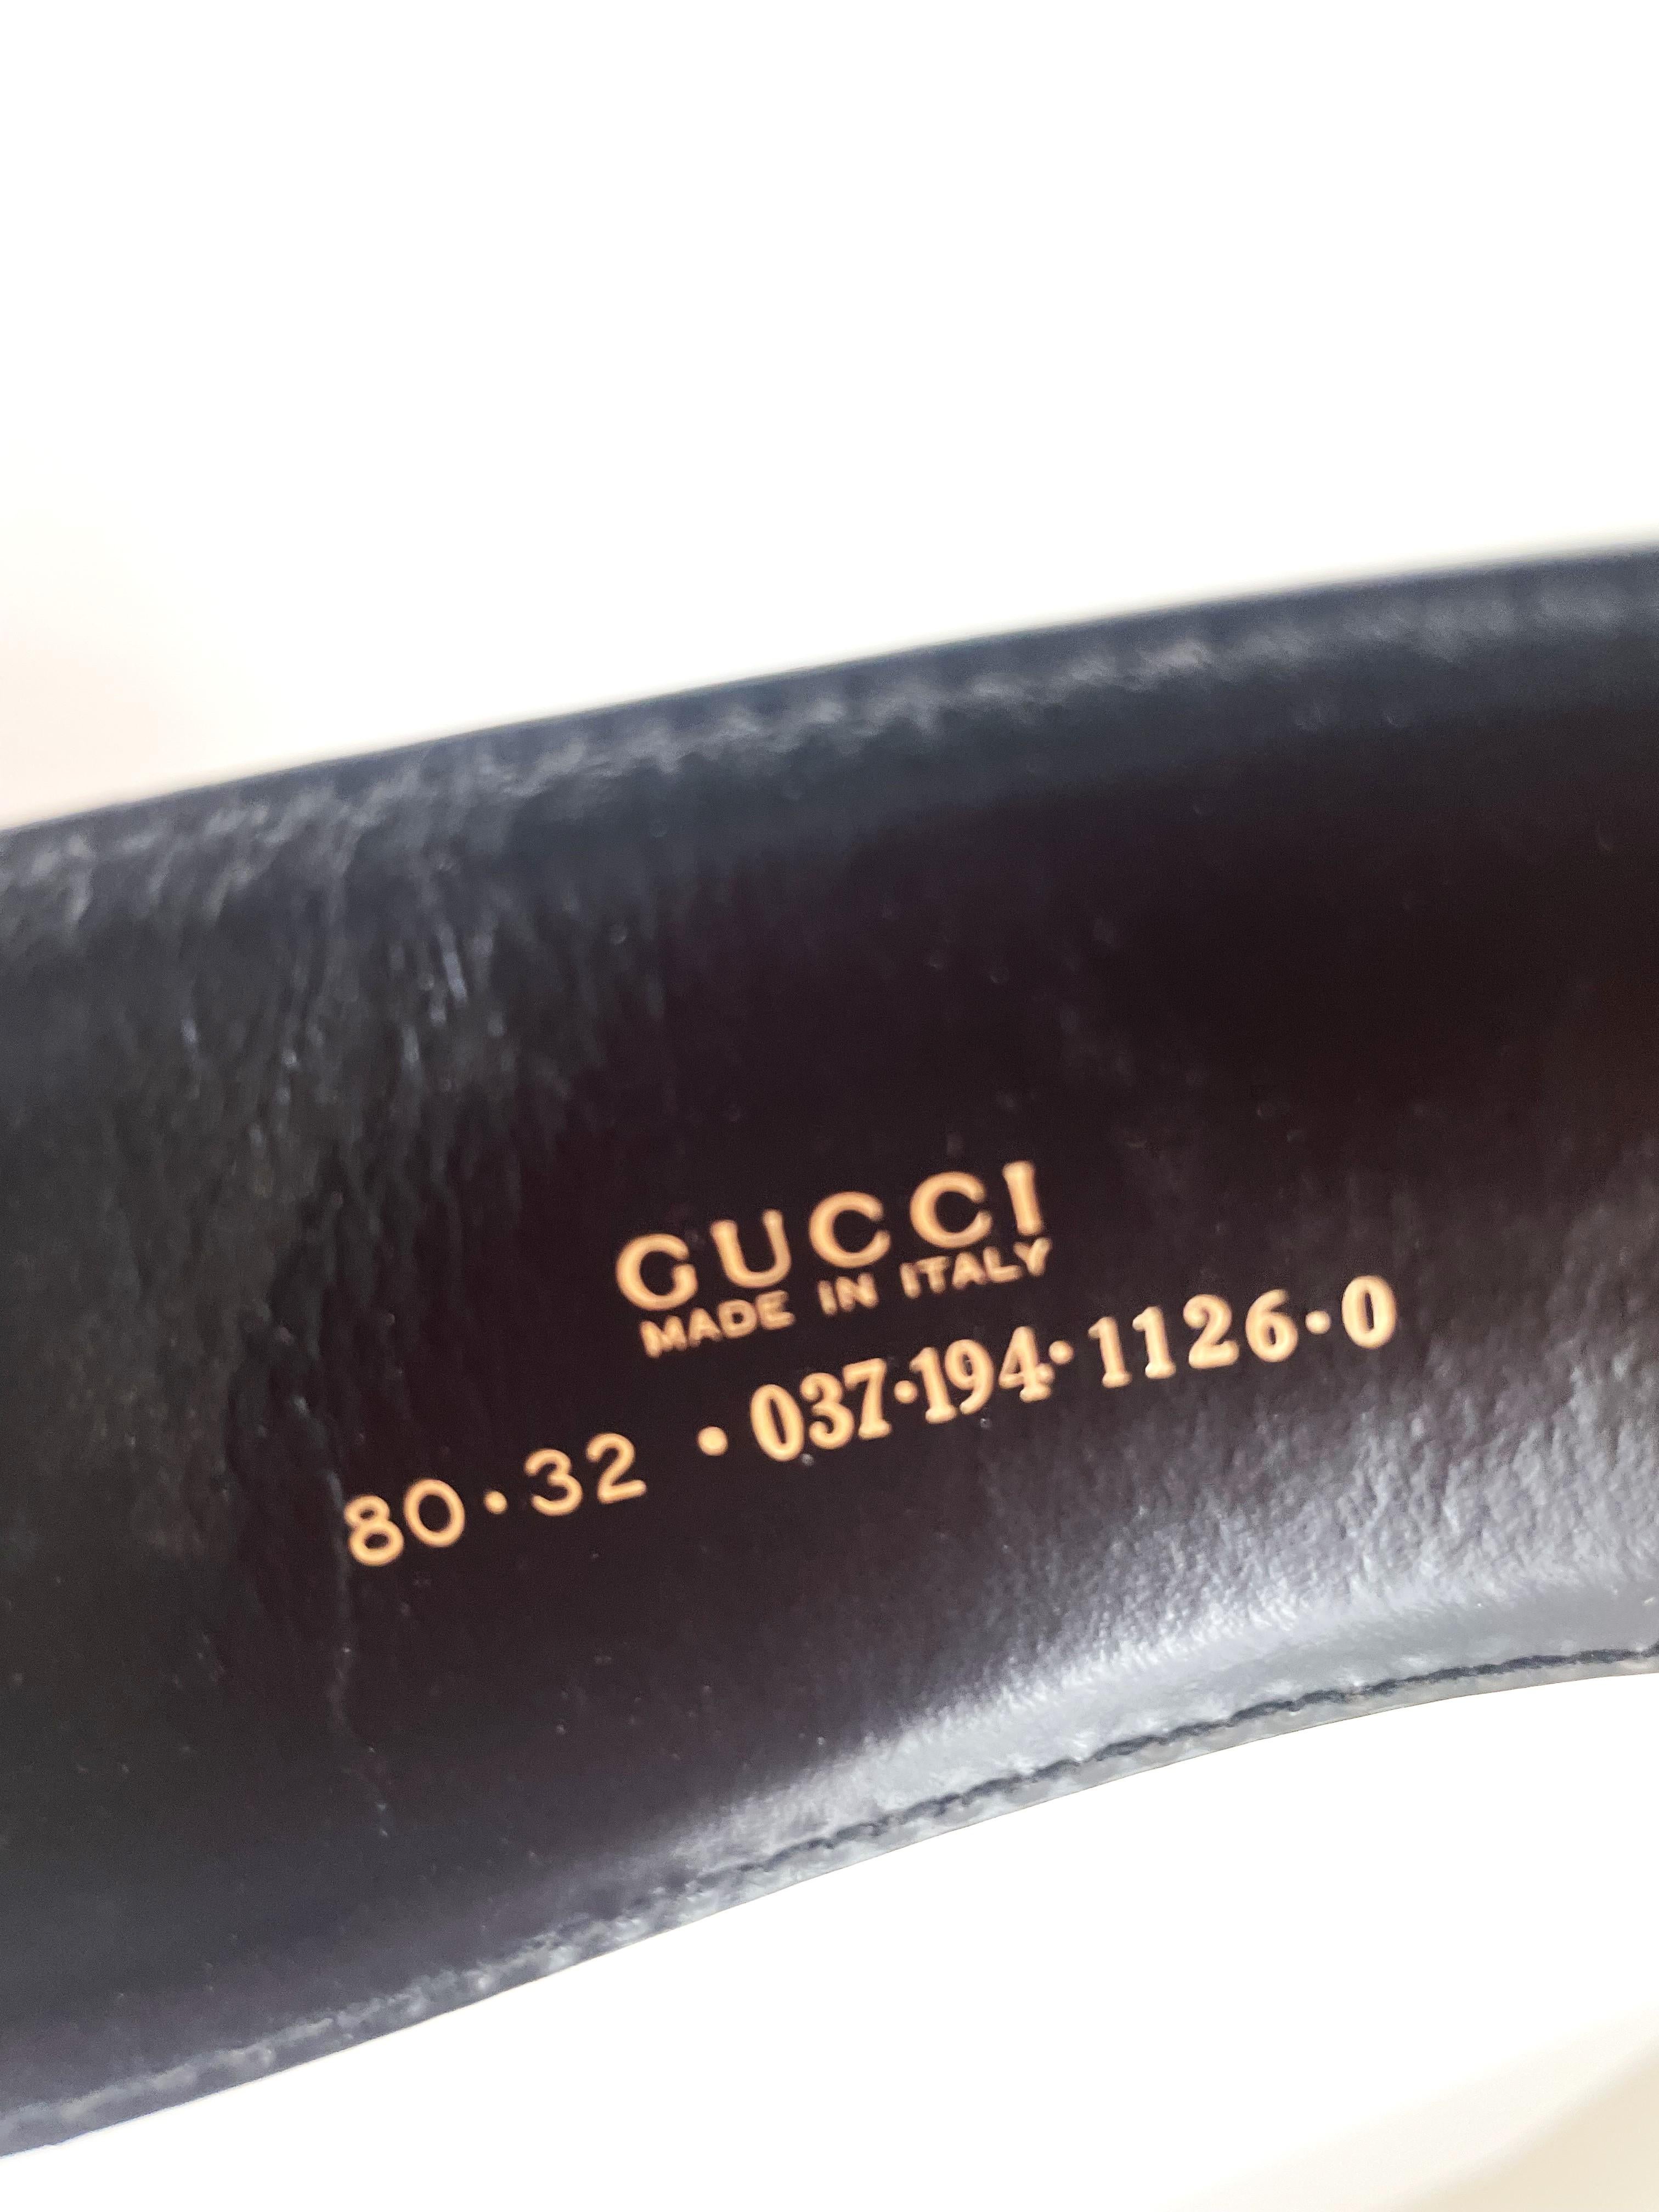 Gucci Belt Black Leather with Gold-plated Oversized Buckle with Gucci logo 1